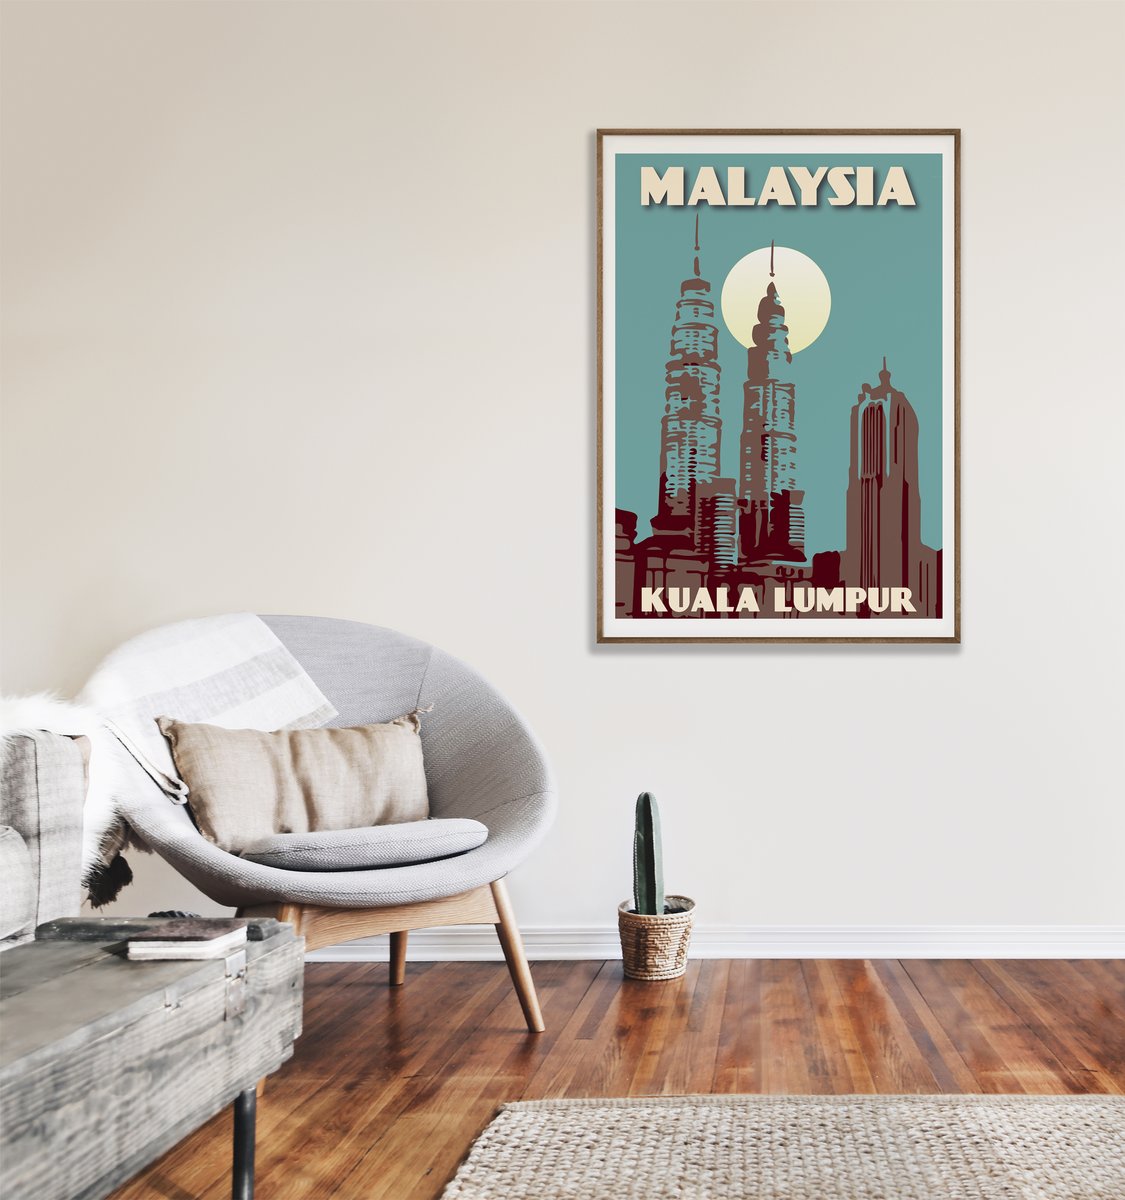 Vintage Souvenirs Poster - Vintage Posters, Maps Magnets | & Malaysia